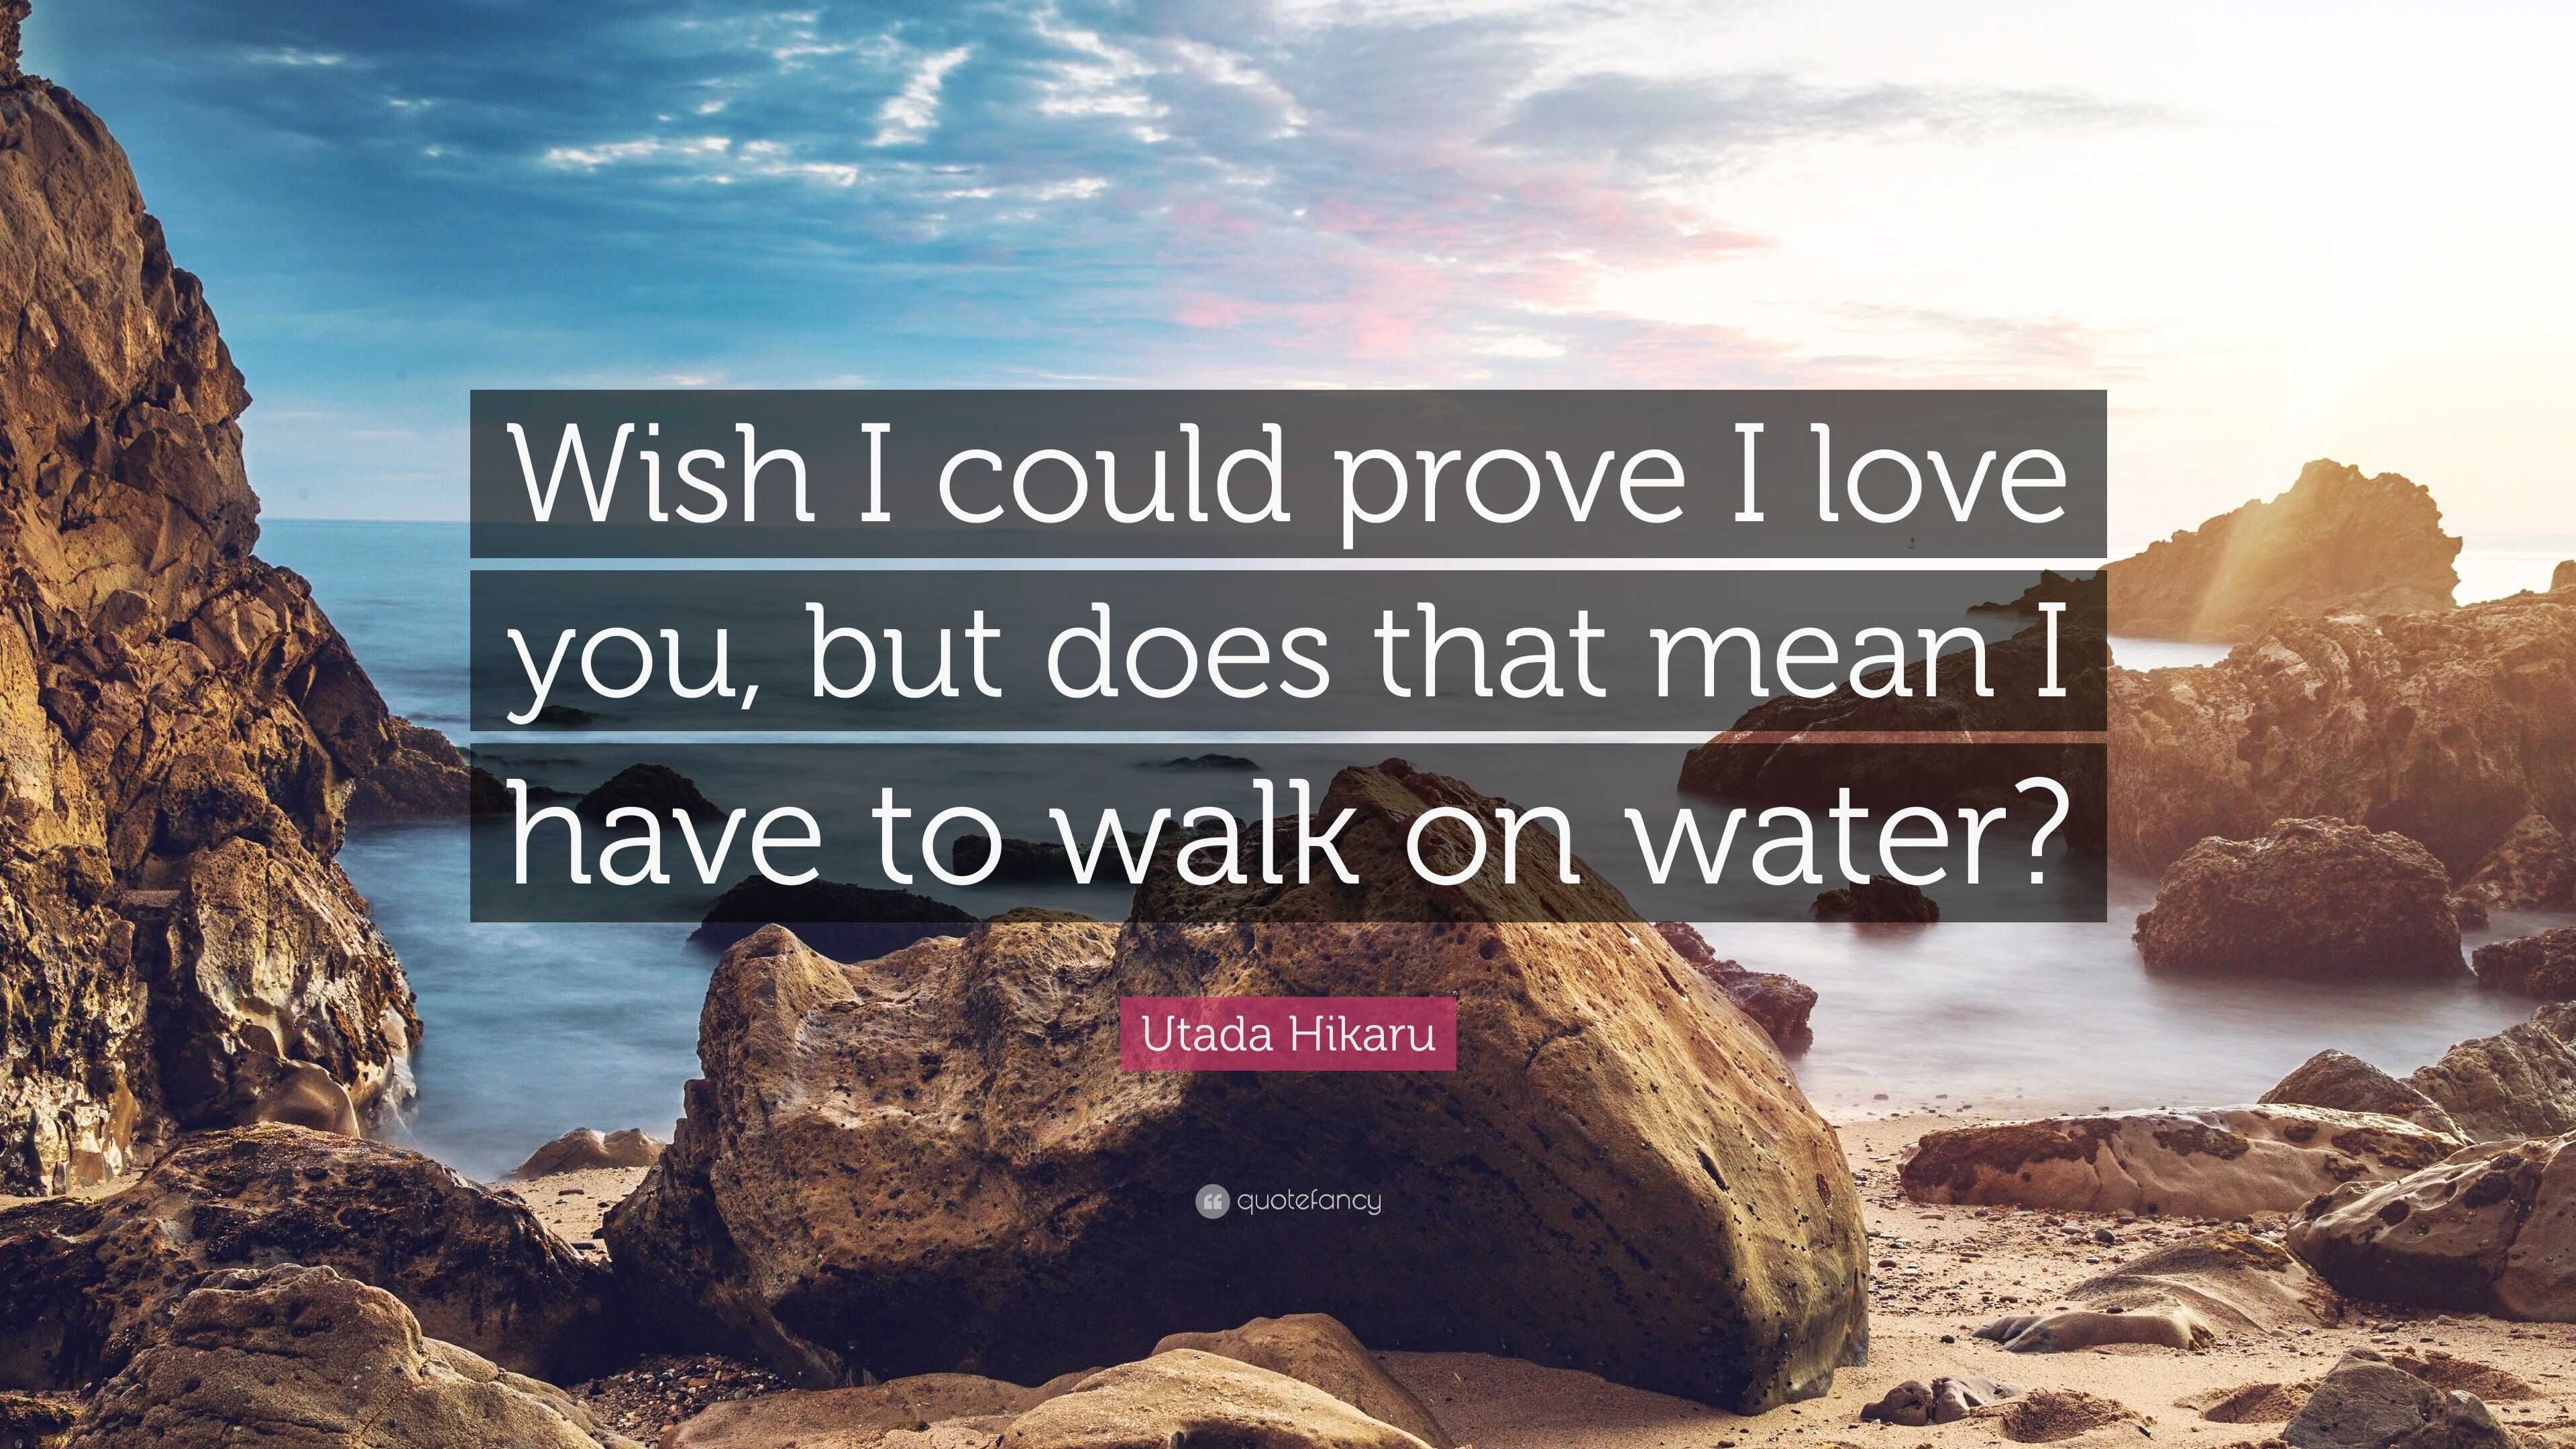 Month of LOVE – Walk On Water